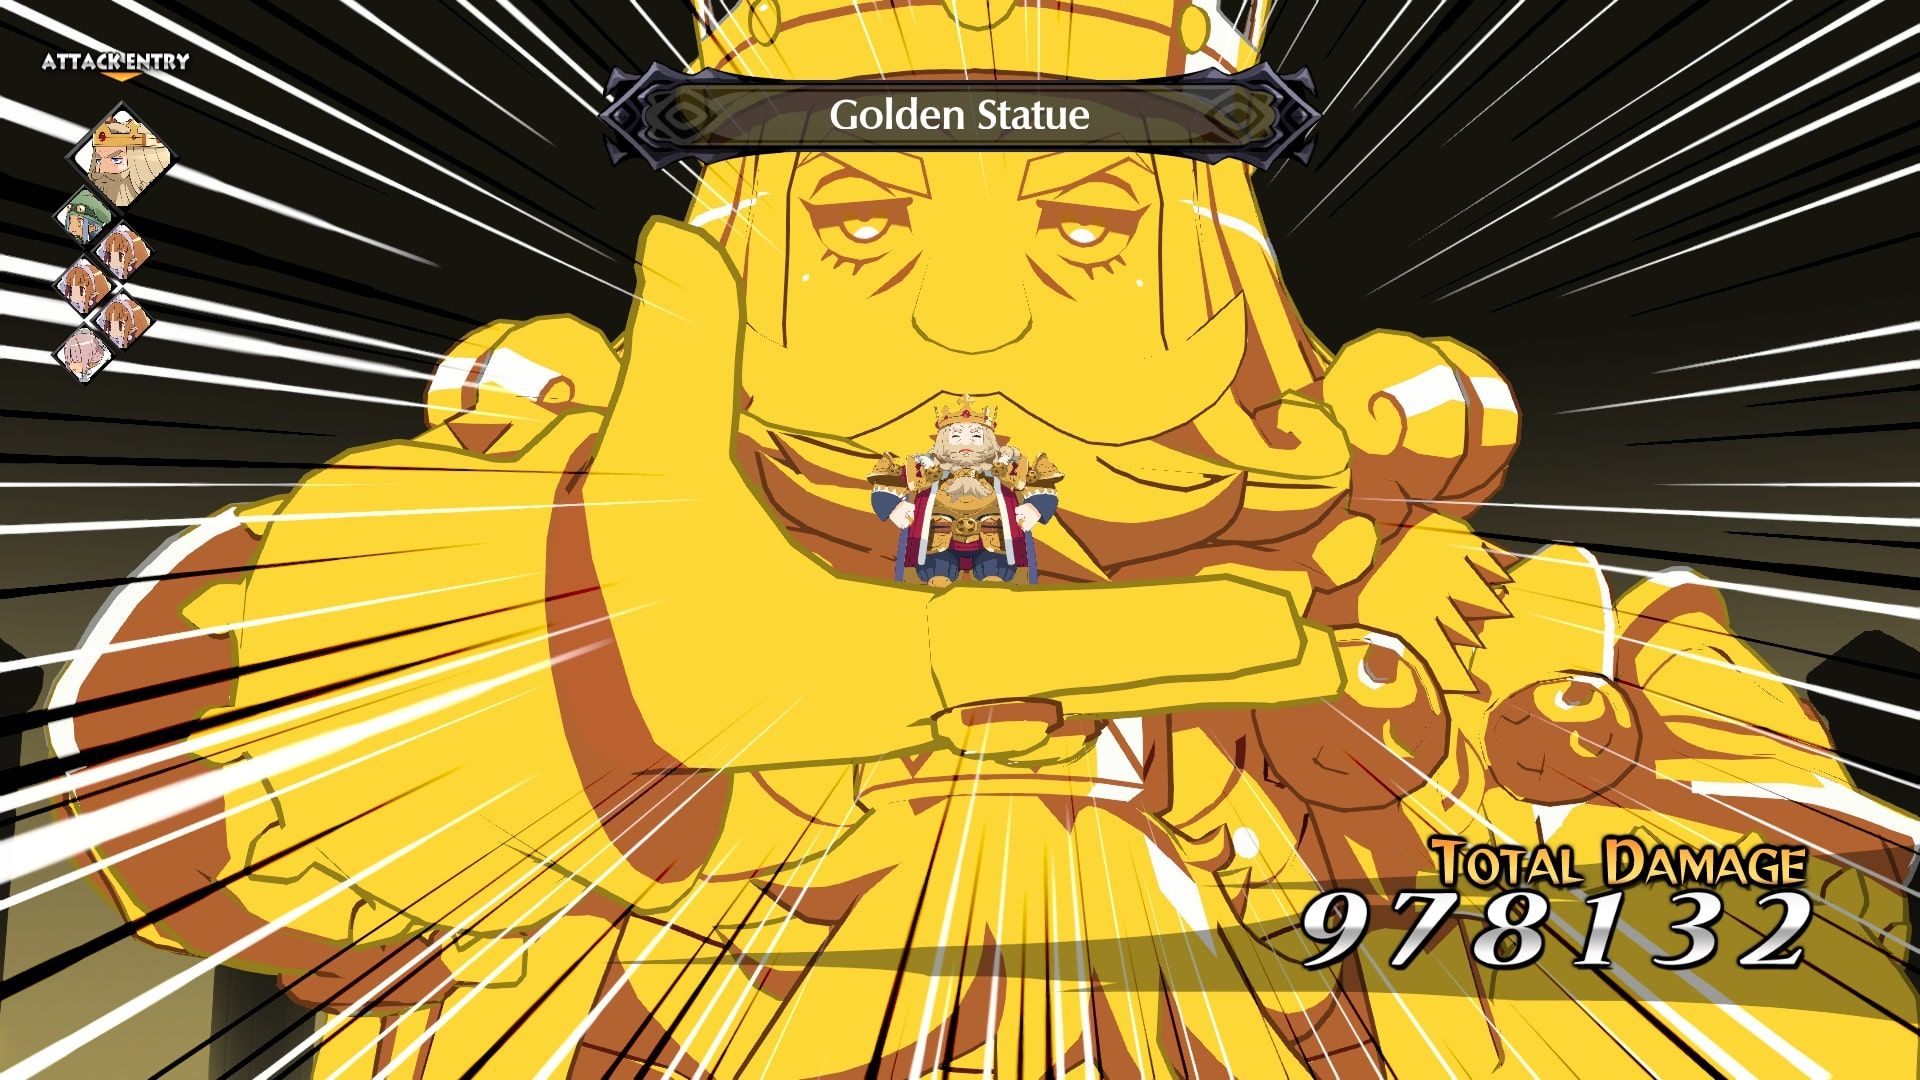 Disgaea 6 Misedor attacking with Golden Statue